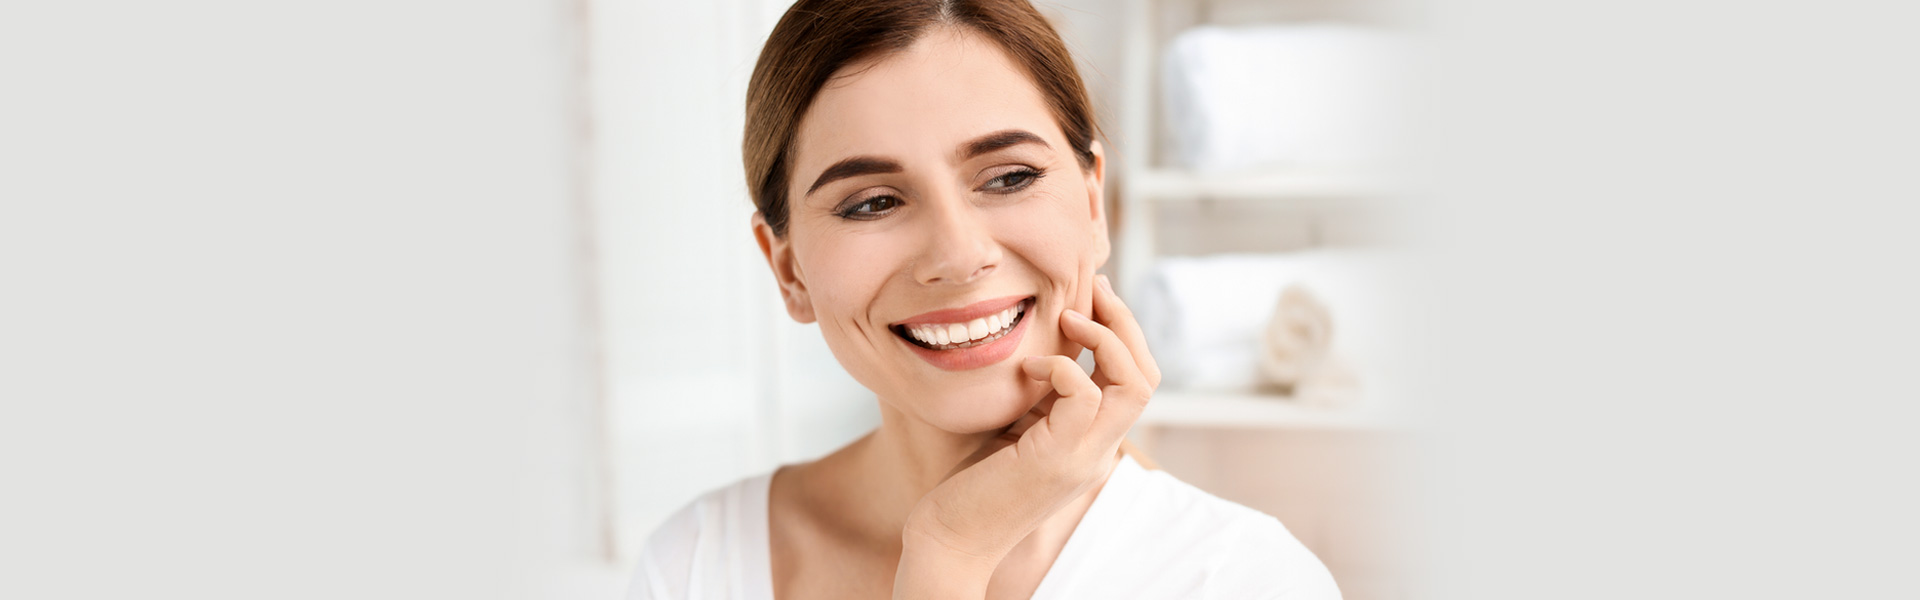 THE BENEFITS DENTAL EXTRACTION AND ITS PROCEDURES